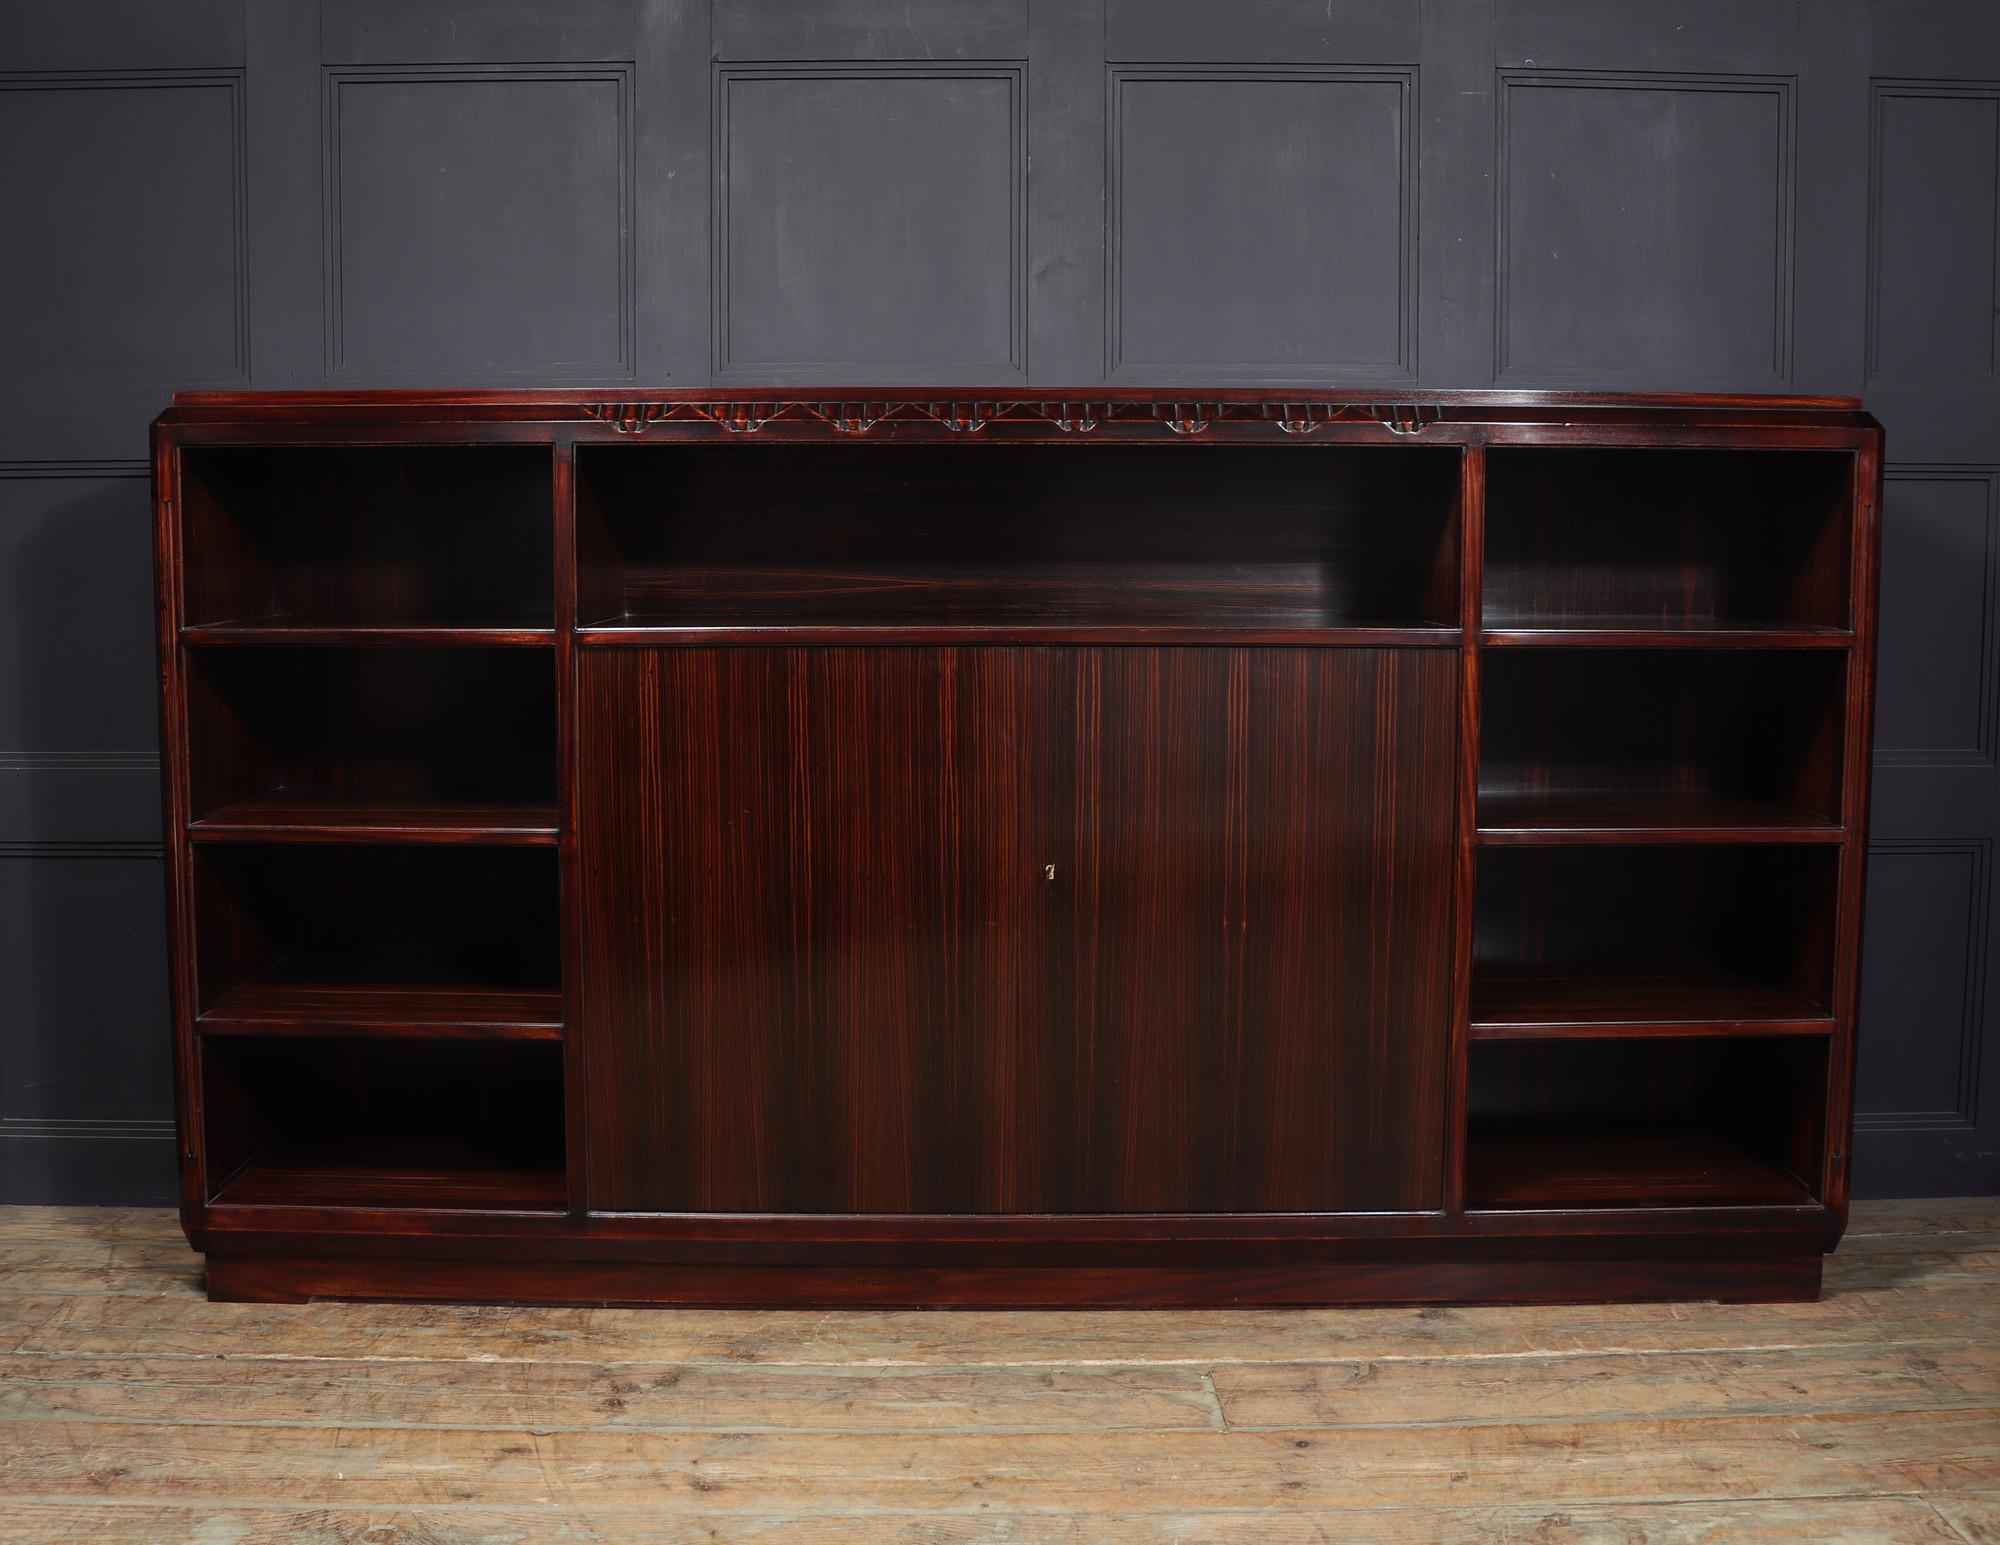 Early 20th Century French Art Deco Macassar Ebony Library Bookcase by Louis Majorelle